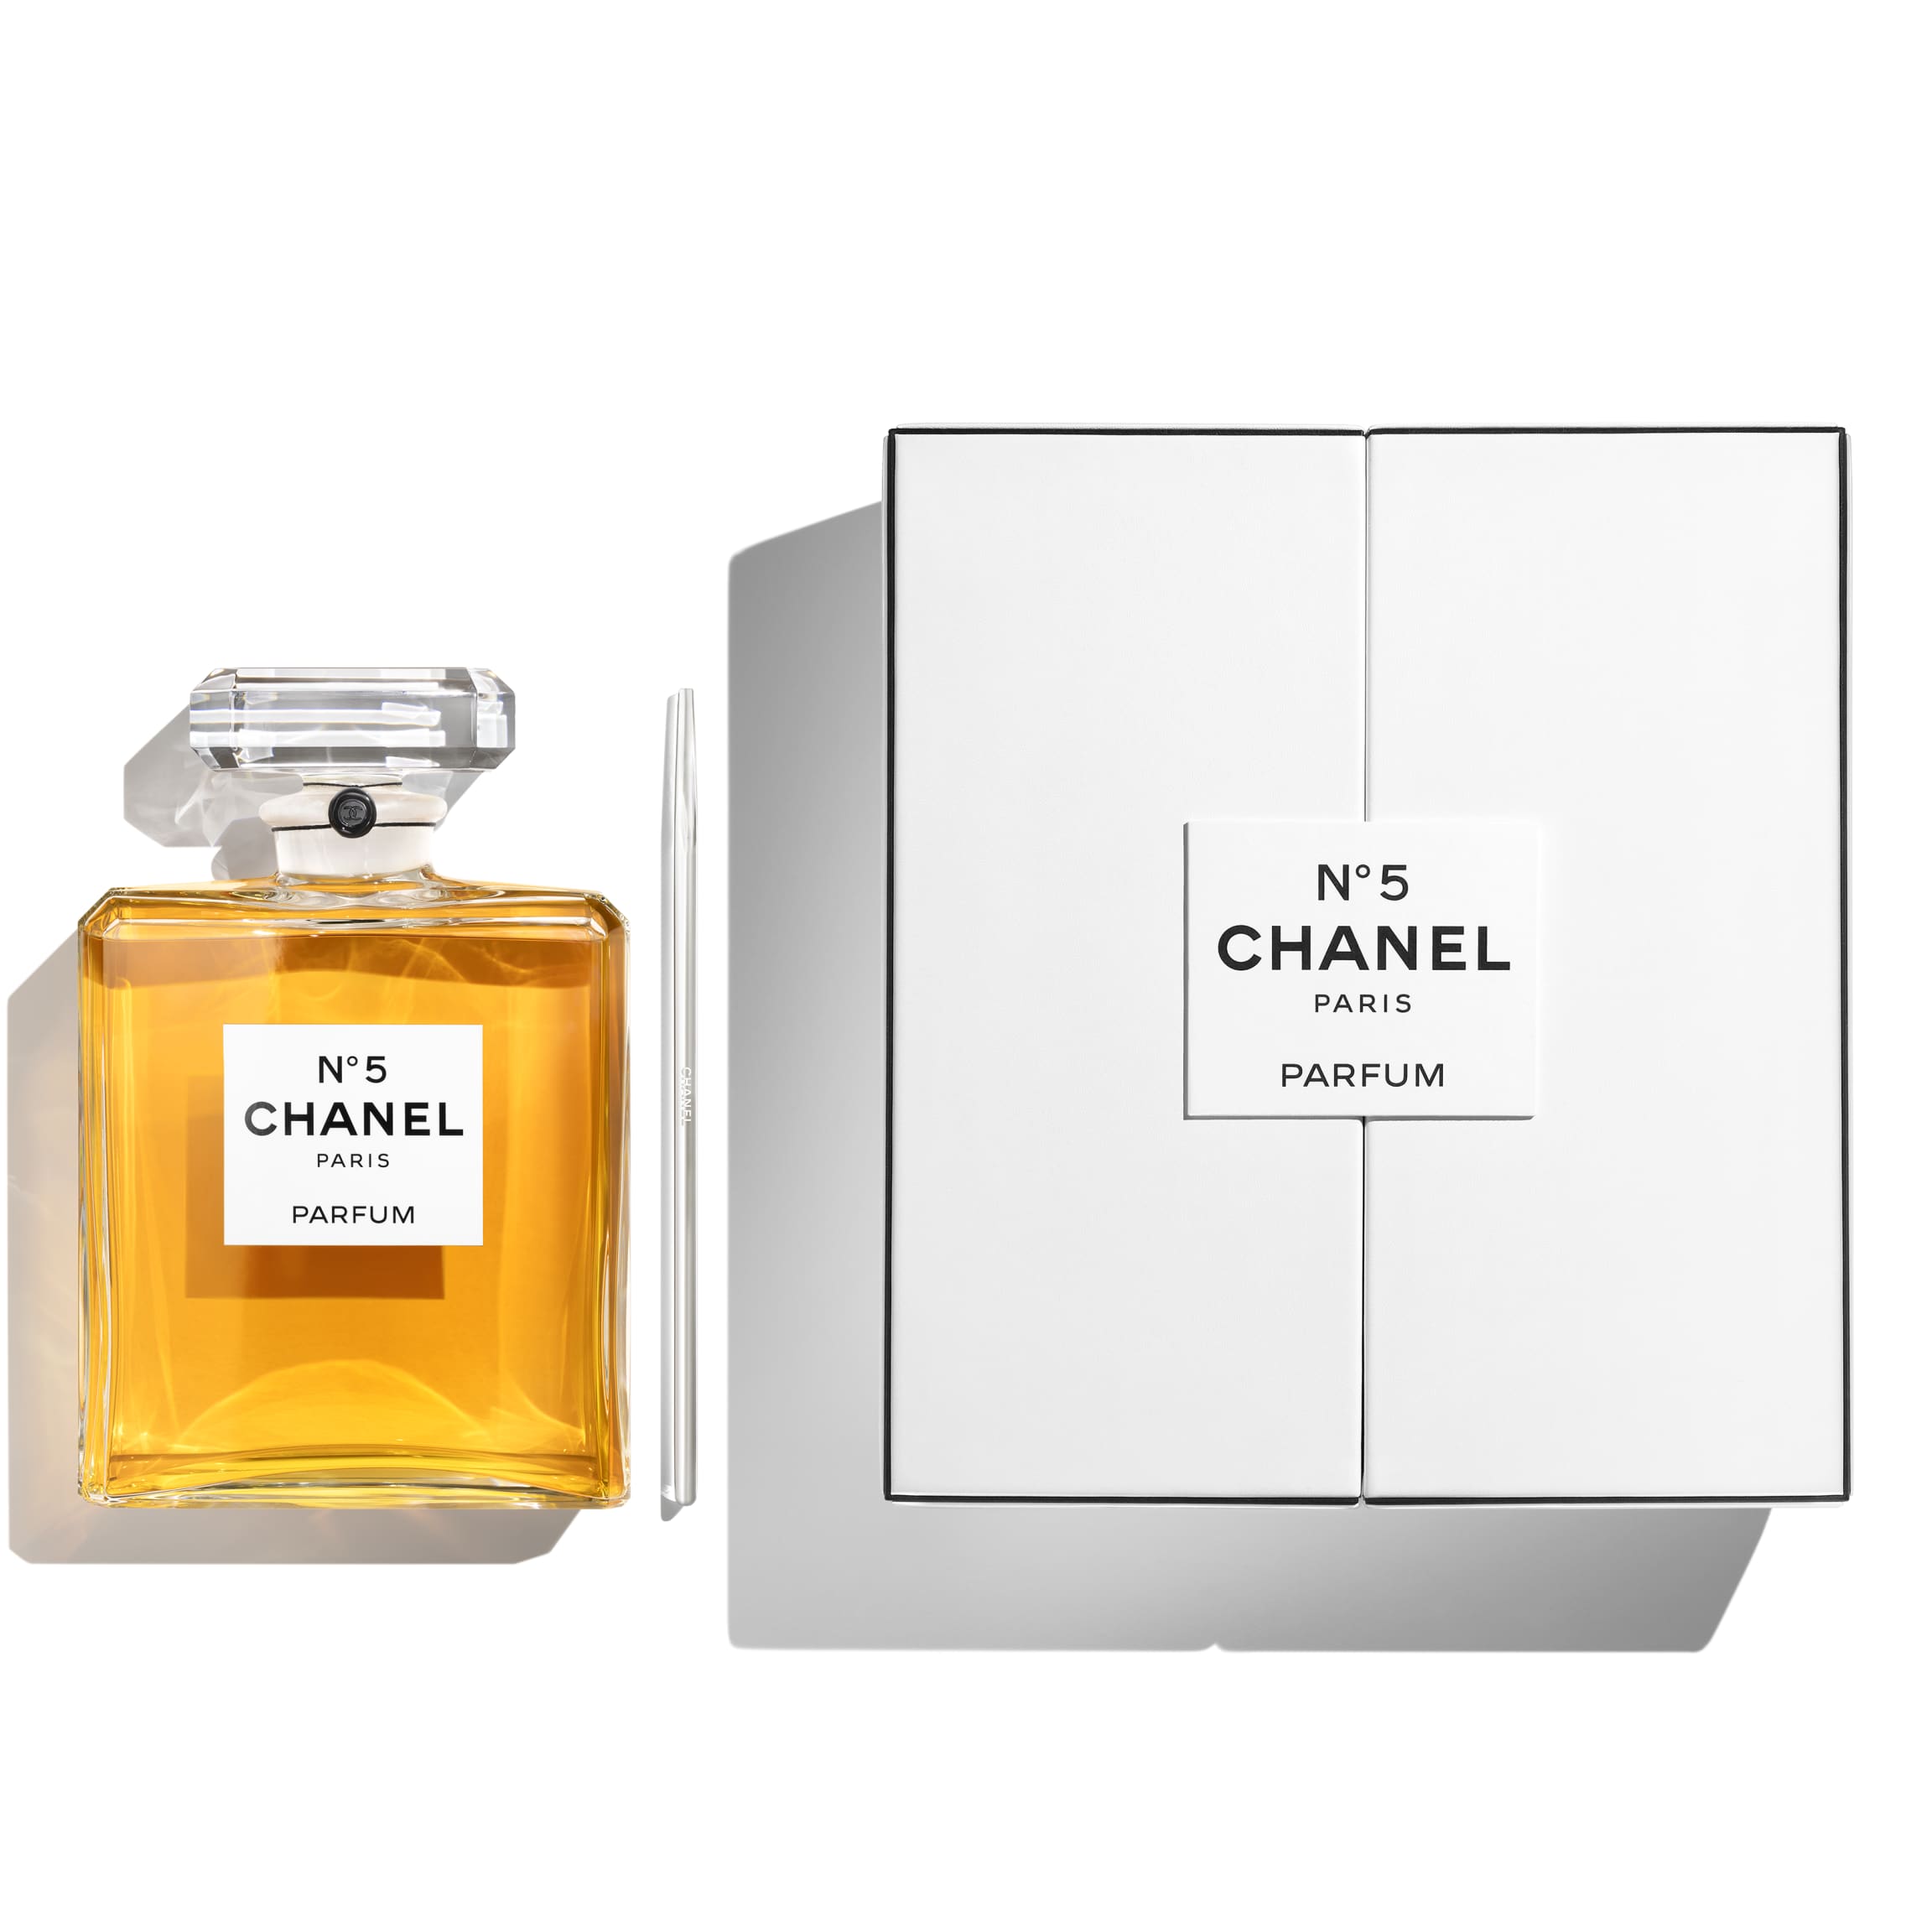 Ernest Beaux, chanel Perfumes, bond No 9, Chanel No. 5, thierry